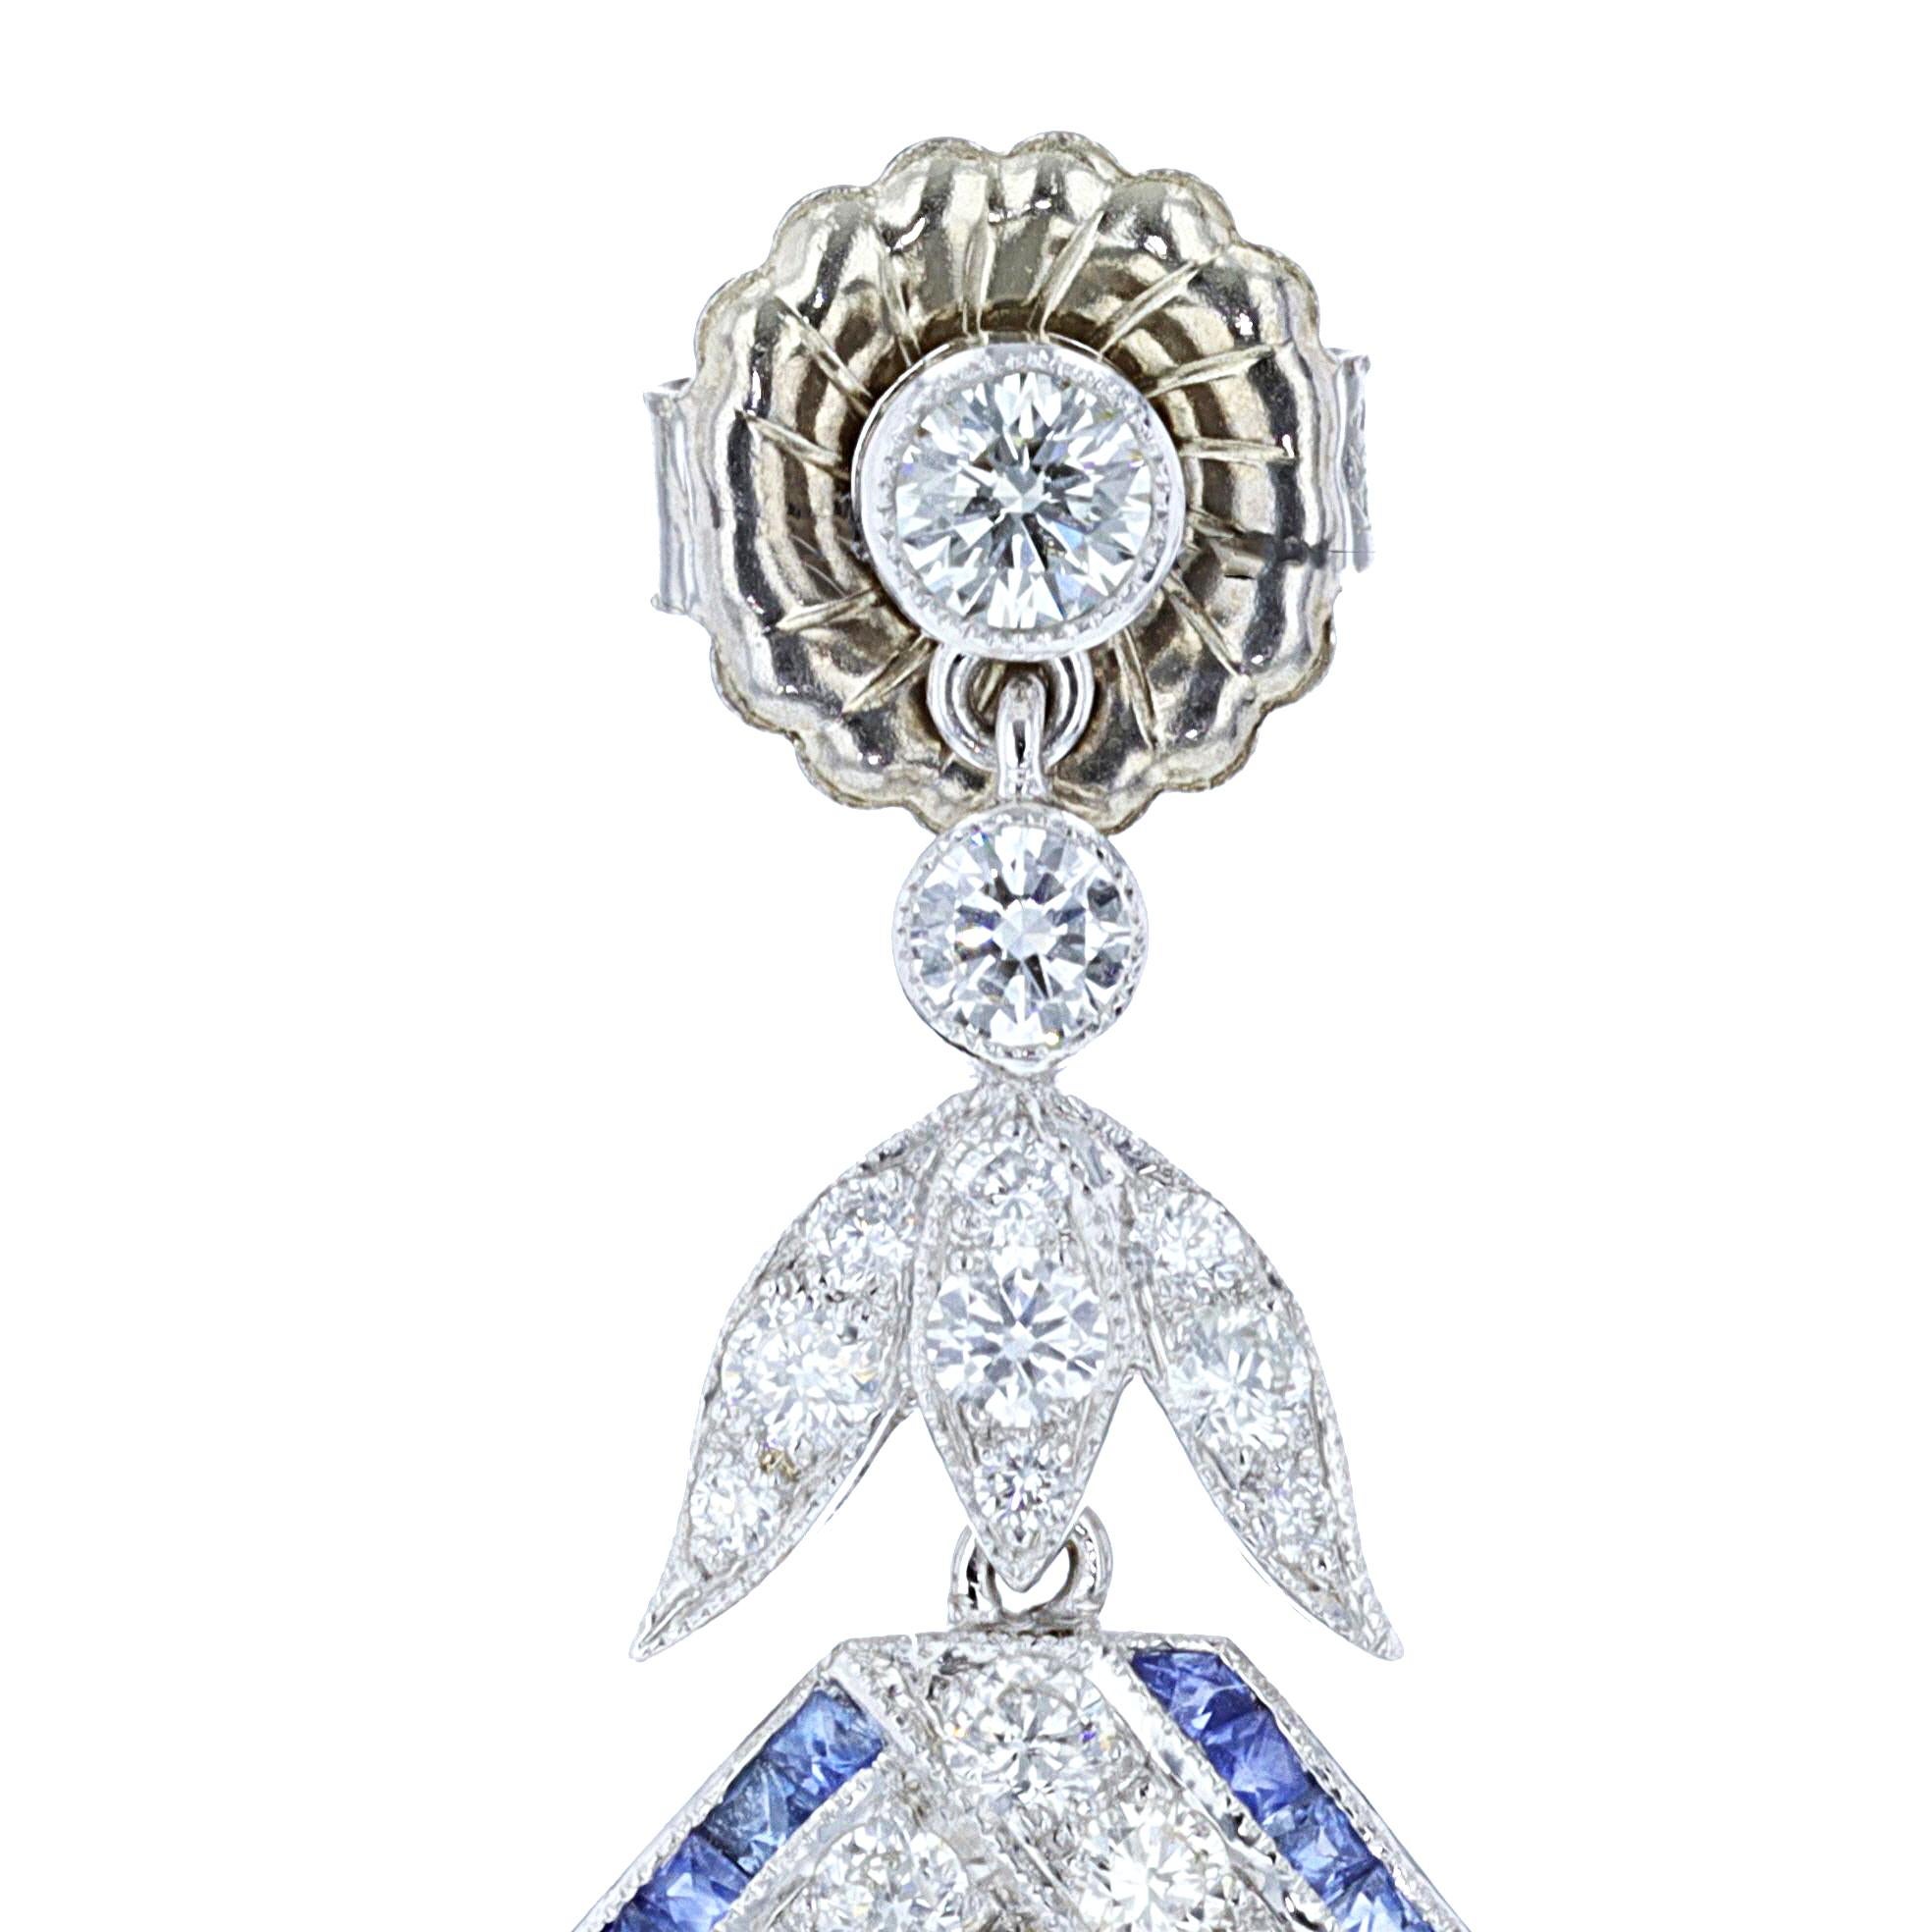 Extraordinary vintage 18K White and Yellow Gold Diamond and Sapphire earrings that absolutely beg to be included in a special night out on the town. The earrings feature sparkling round cut diamonds that weigh approximately 2.00ct. and are